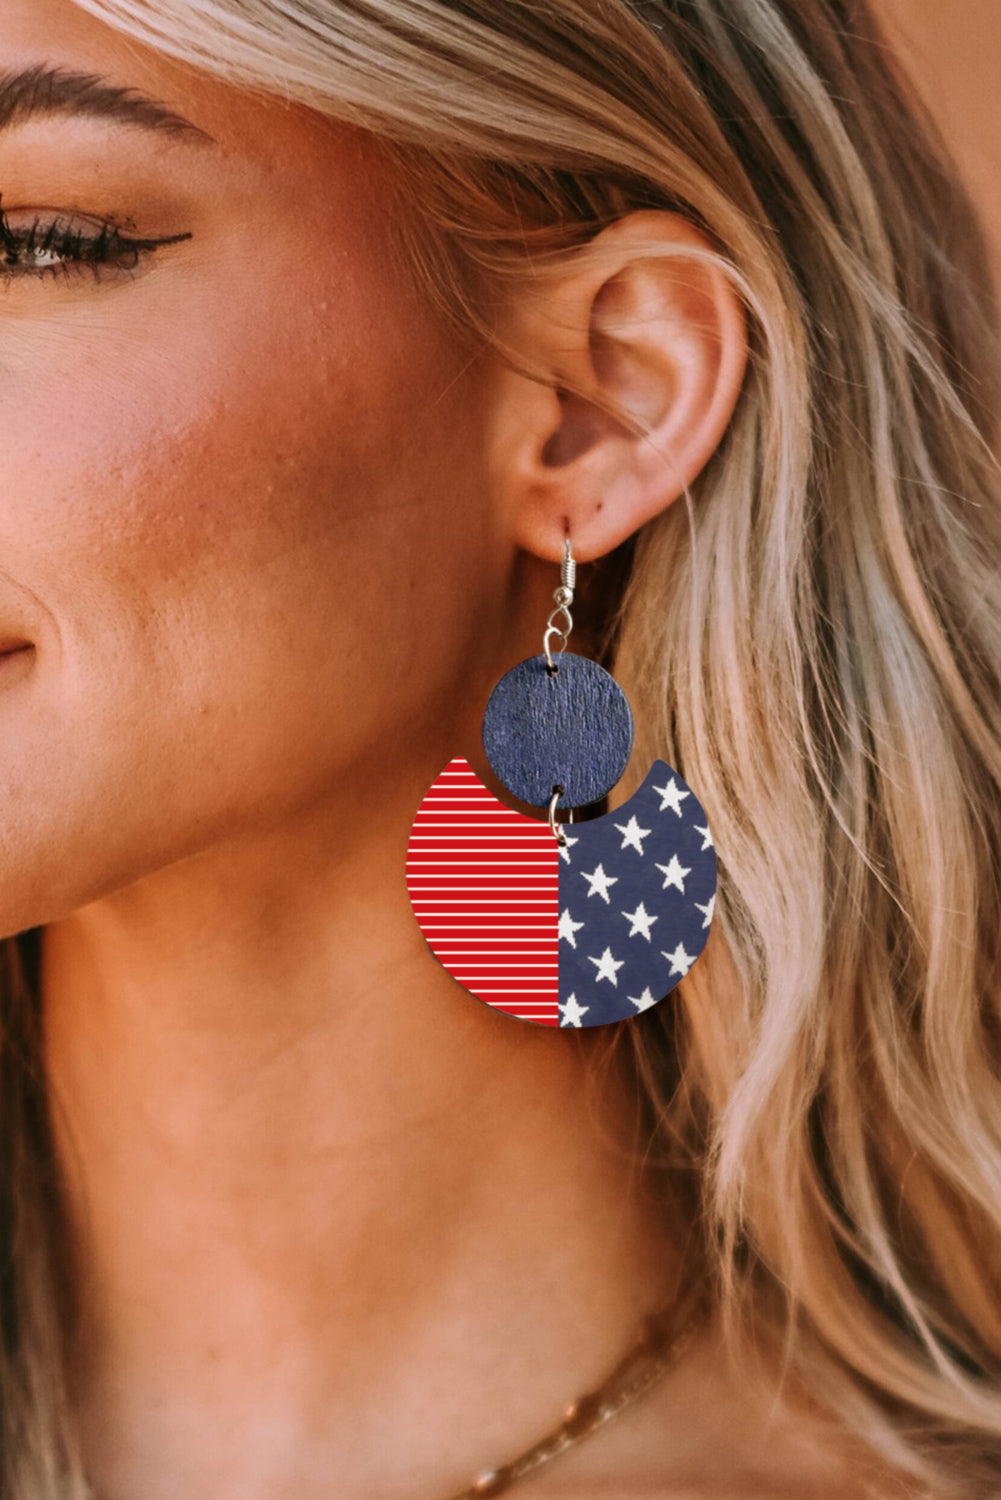 Multicolor Stars & Stripes Independent Day Dangle Earrings